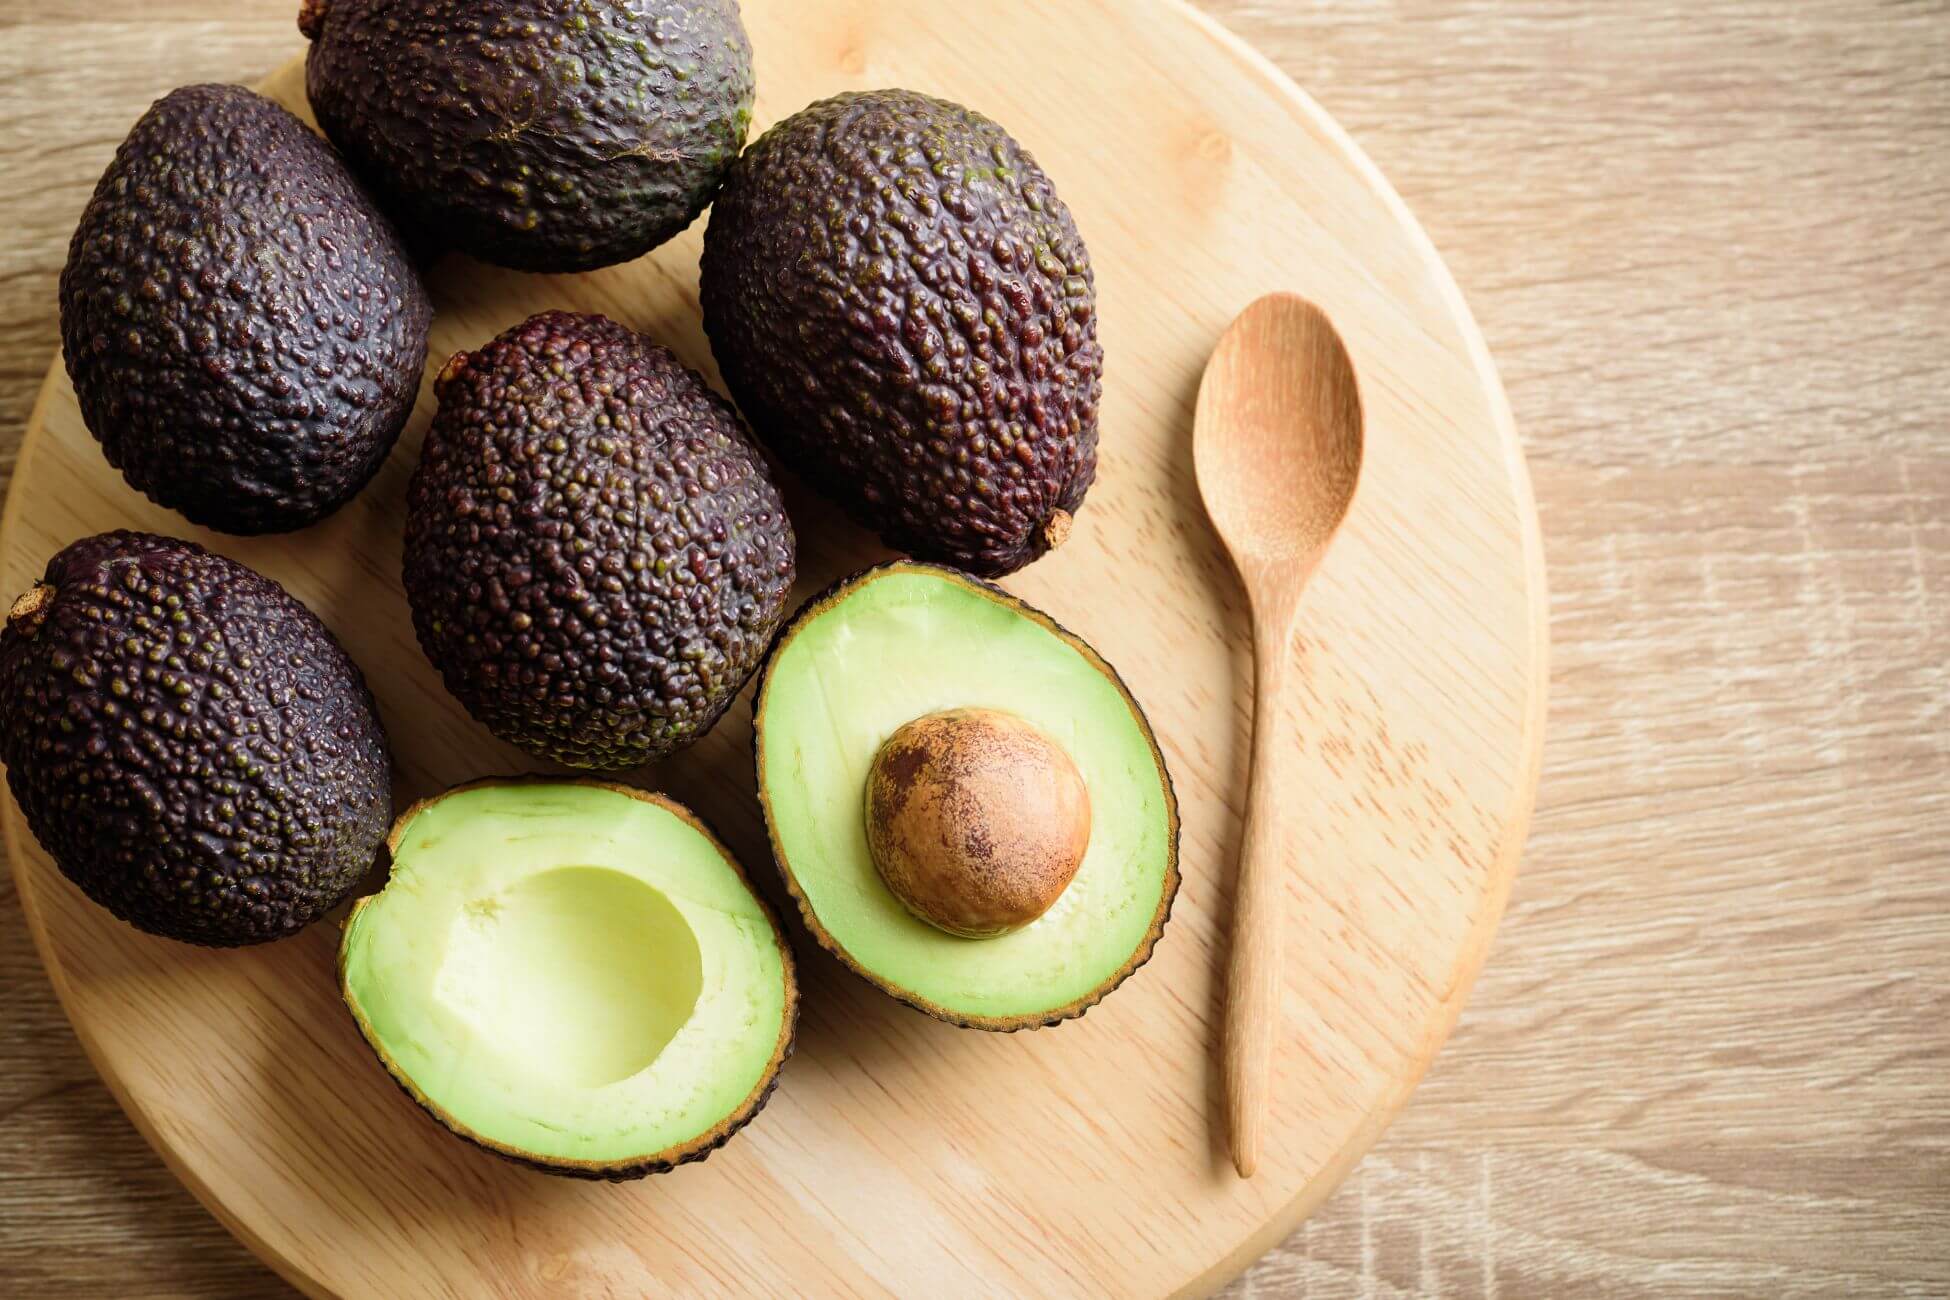 A wooden round cutting board with six avocados, including one halved to show its seed and green flesh.